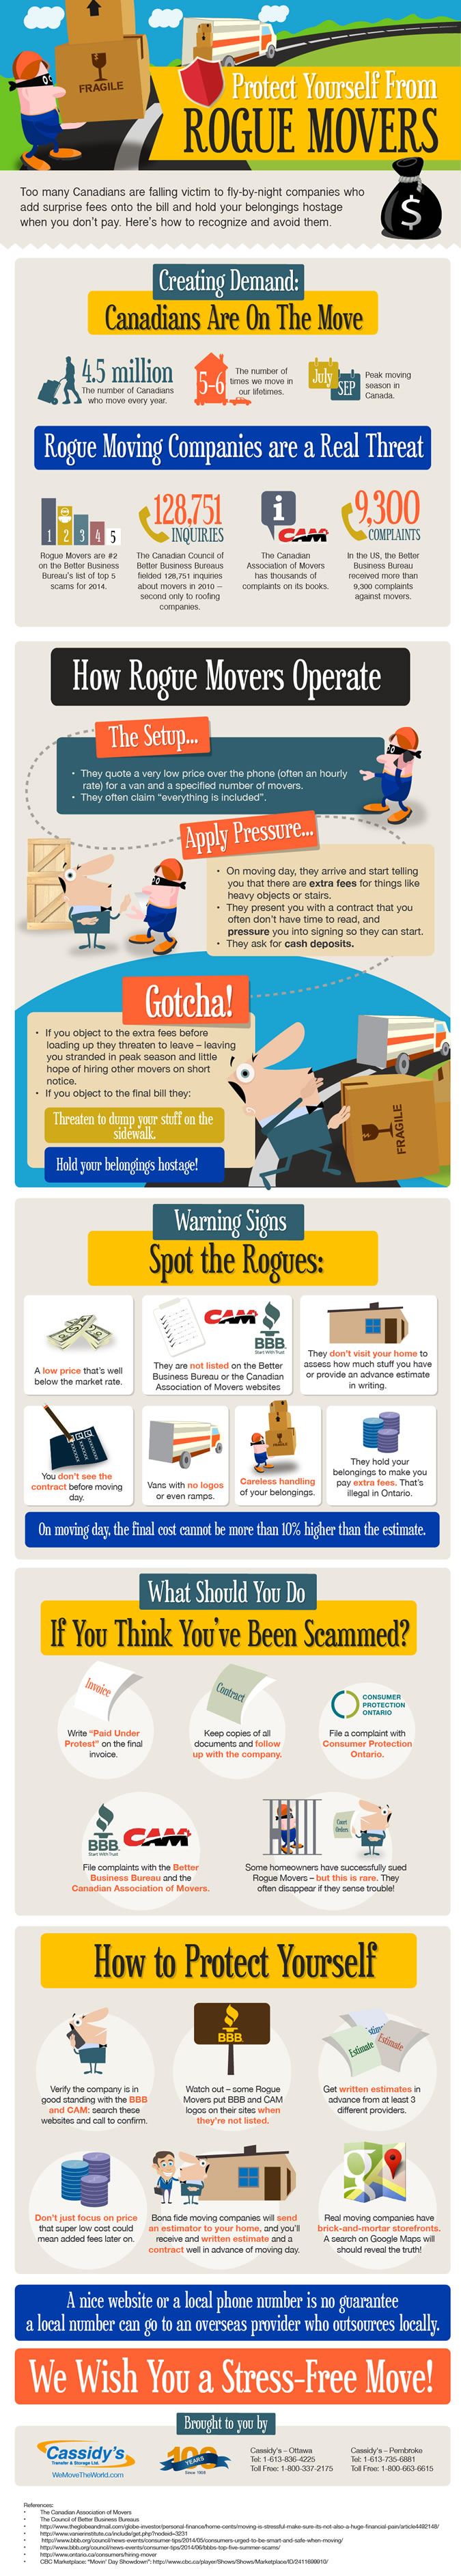 Protect Yourself From Rogue Movers